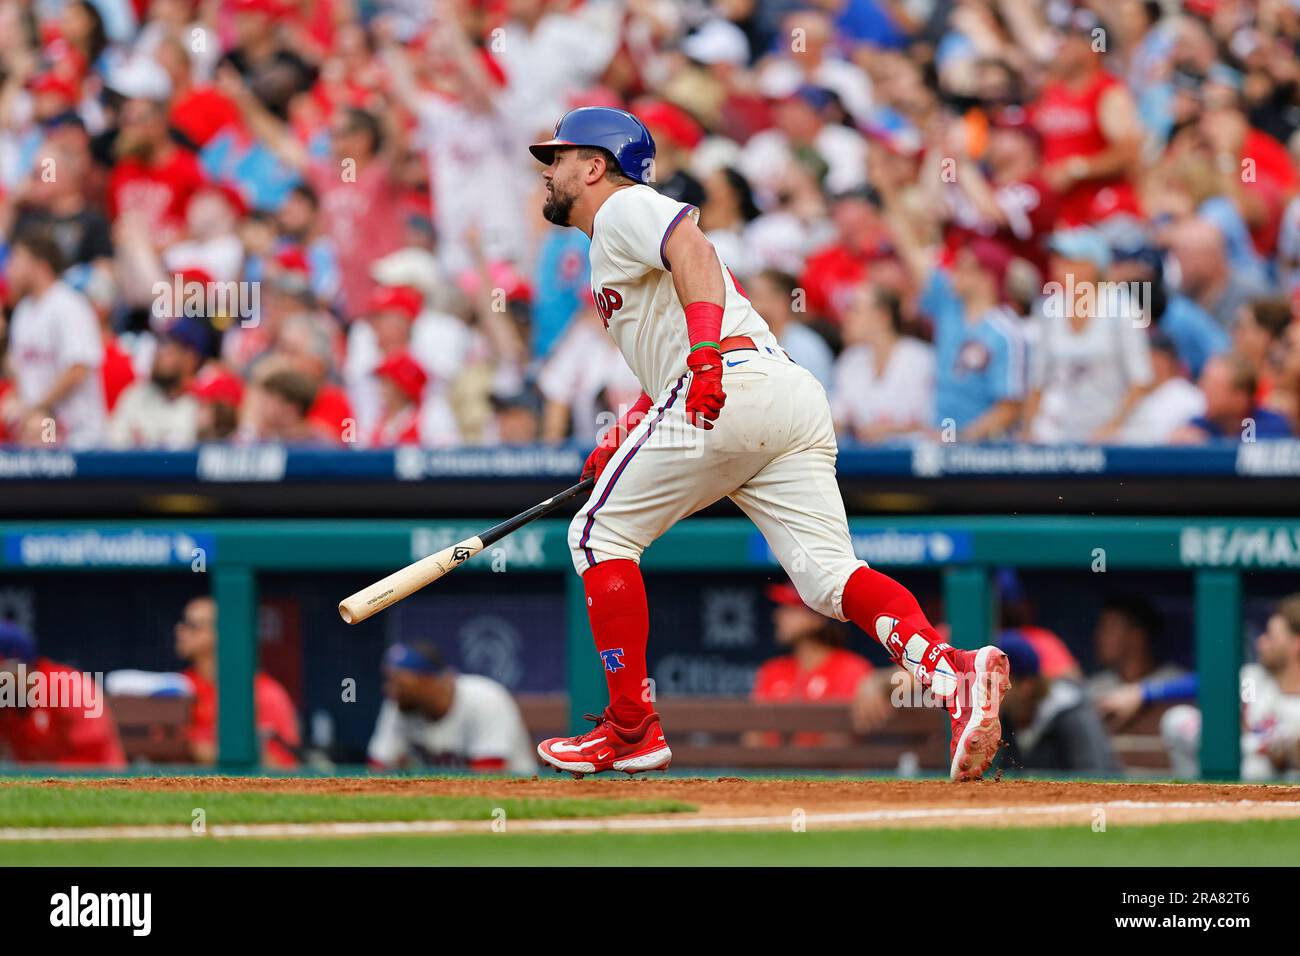 PHILADELPHIA, PA - JULY 01: Kyle Schwarber #12 of the Philadelphia Phillies  hits a grand slam home run during the fifth inning of the game against the  Washington Nationals on July 1